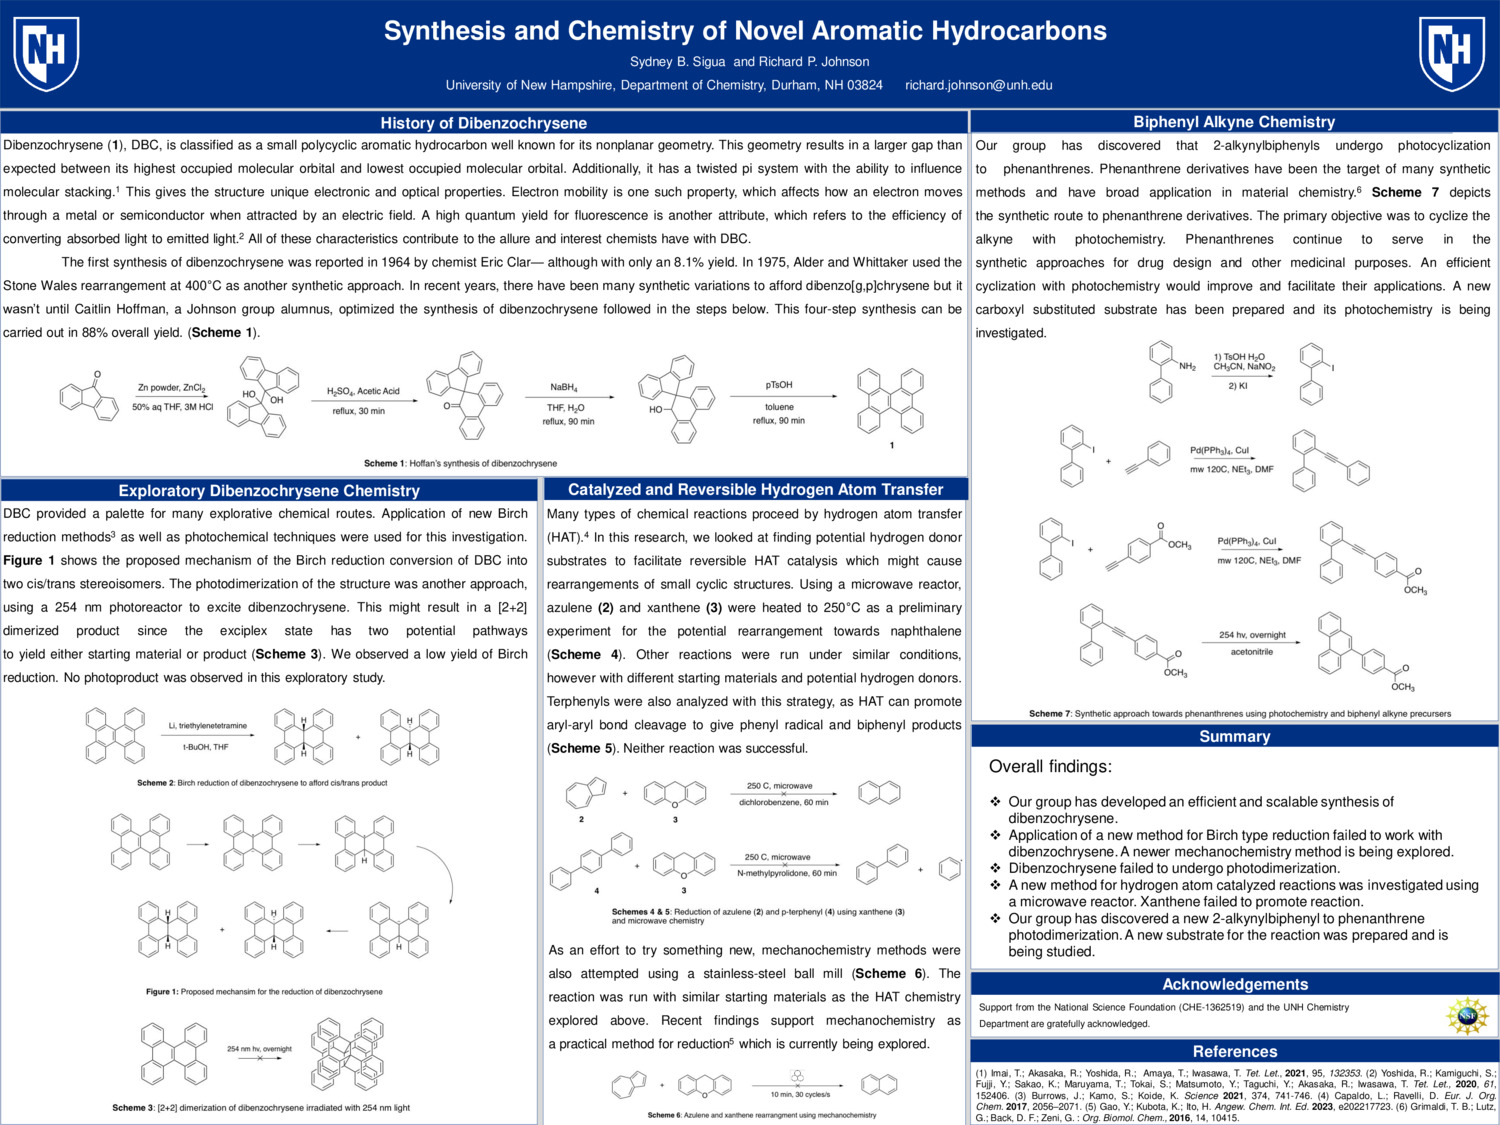 Synthesis And Chemistry Of Novel Aromatic Hydrocarbons by sydneysigua